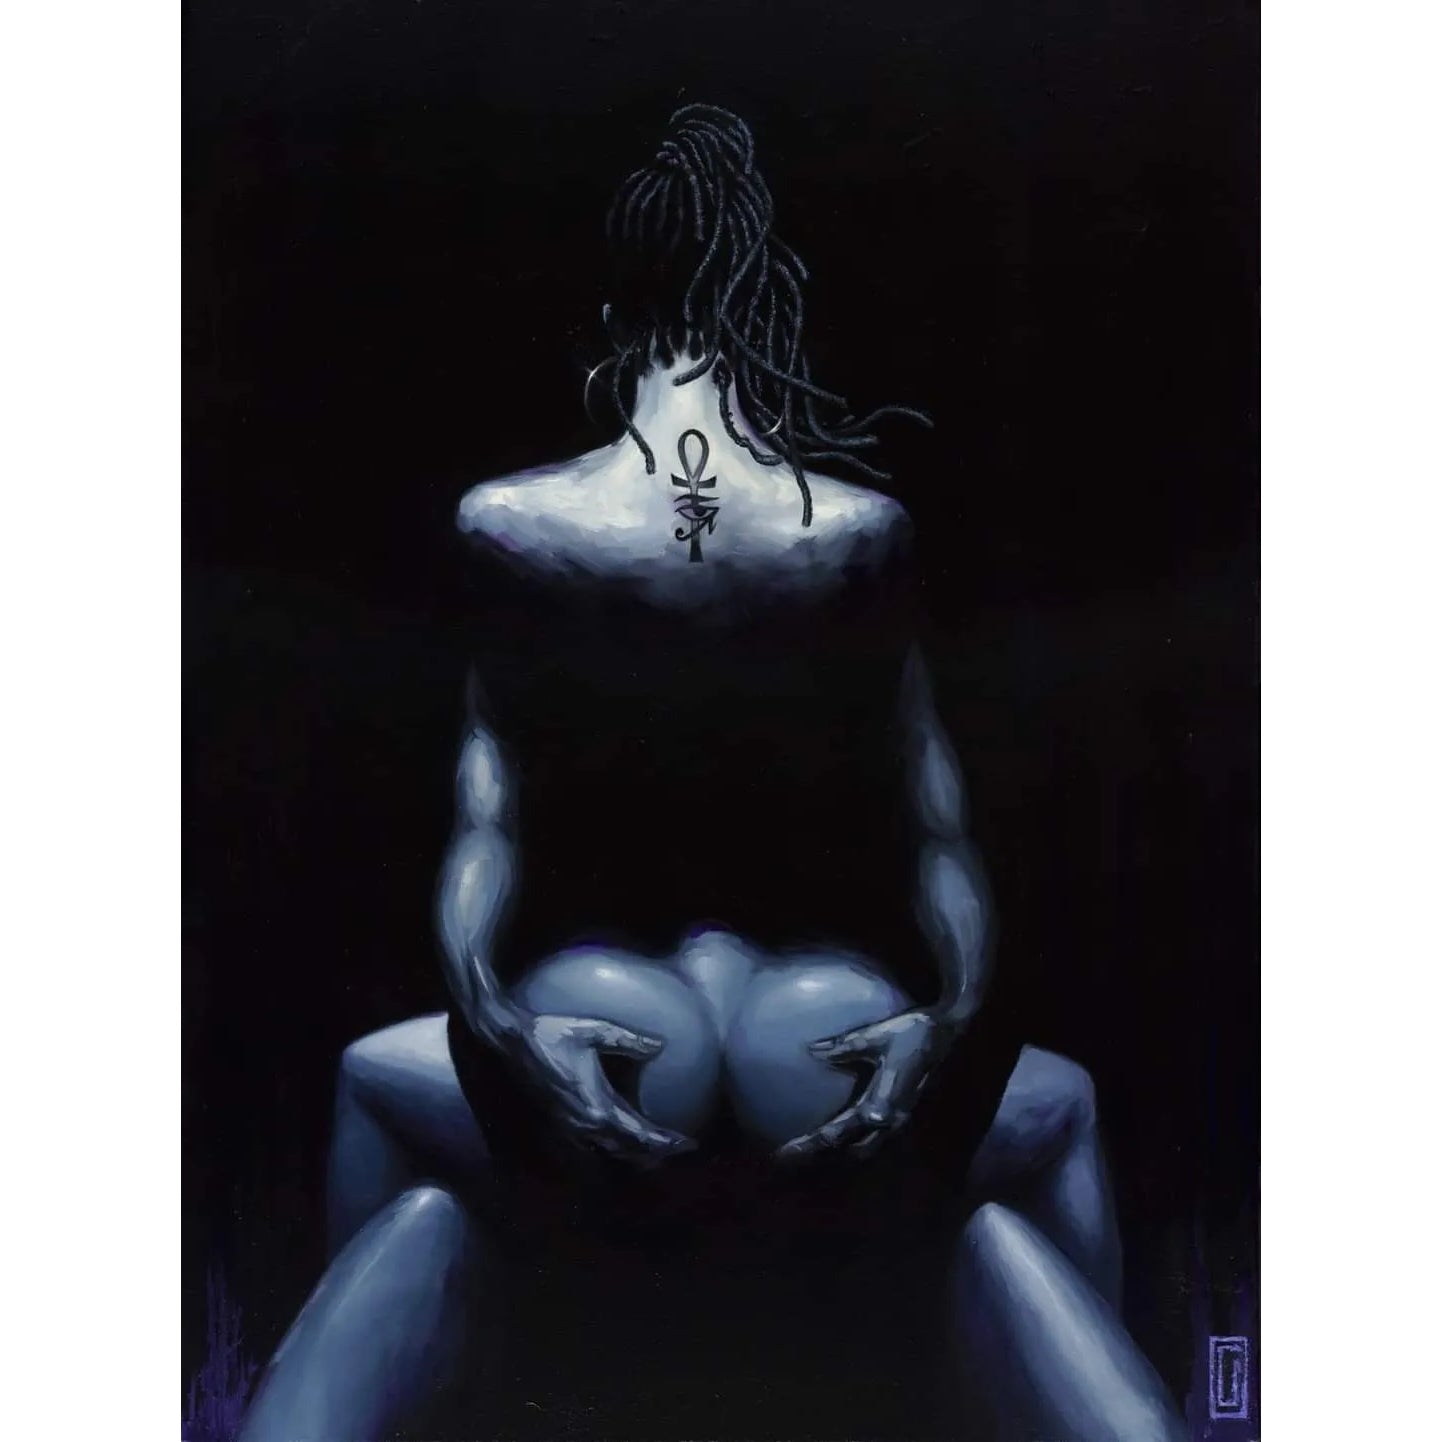 Black Erotic Art Prints, Figurines and Gifts Adult Picture